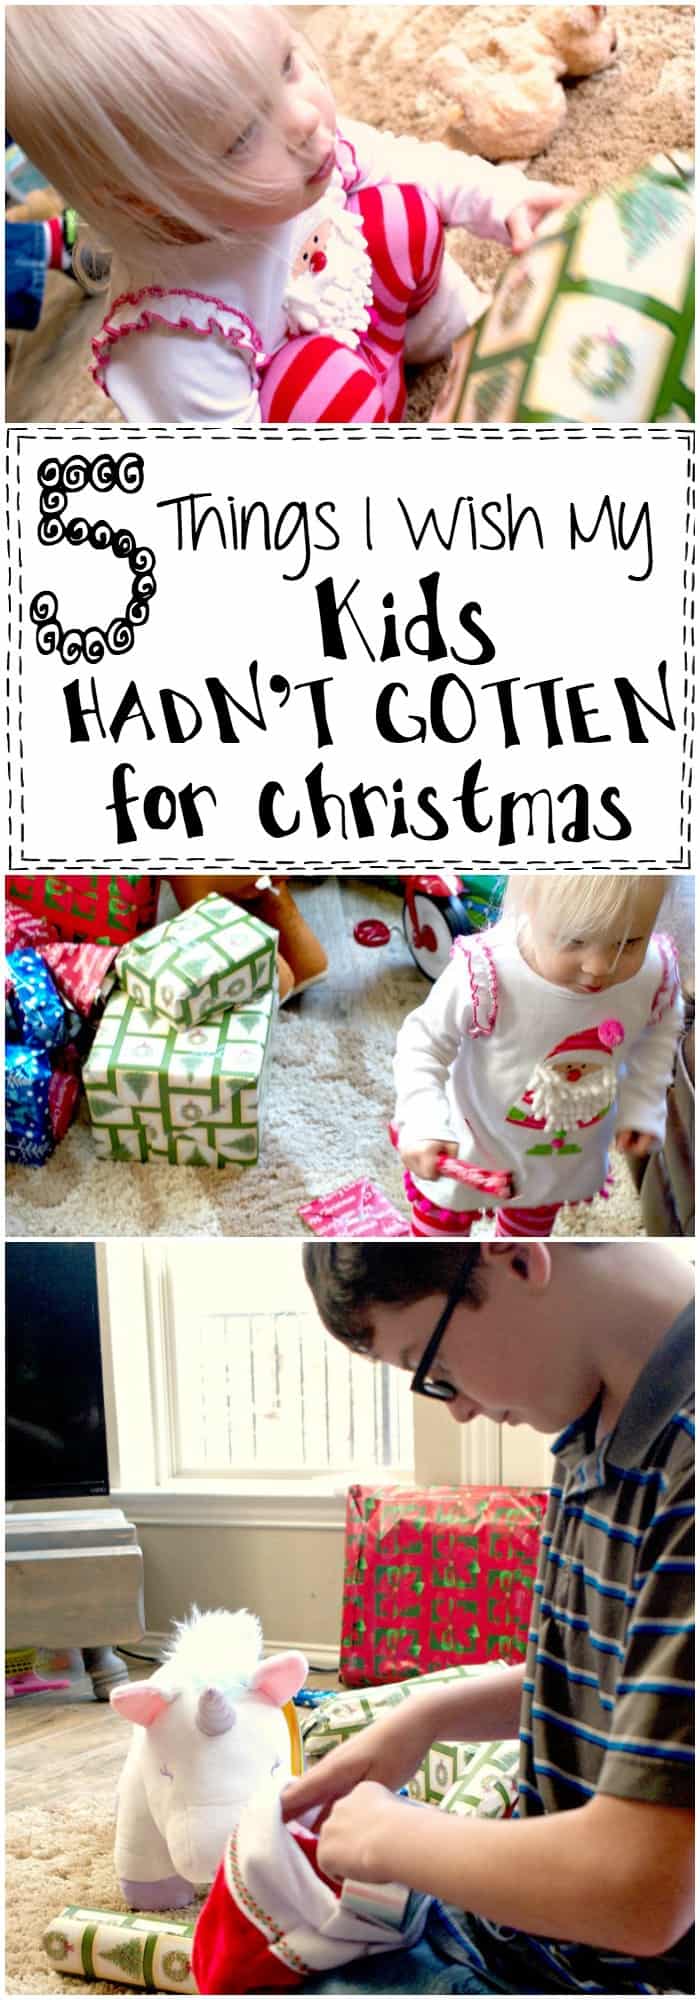 This list of 5 Things I Wish My Kids HADN'T GOTTEN for Christmas is so funny! Like seriously...LOL!